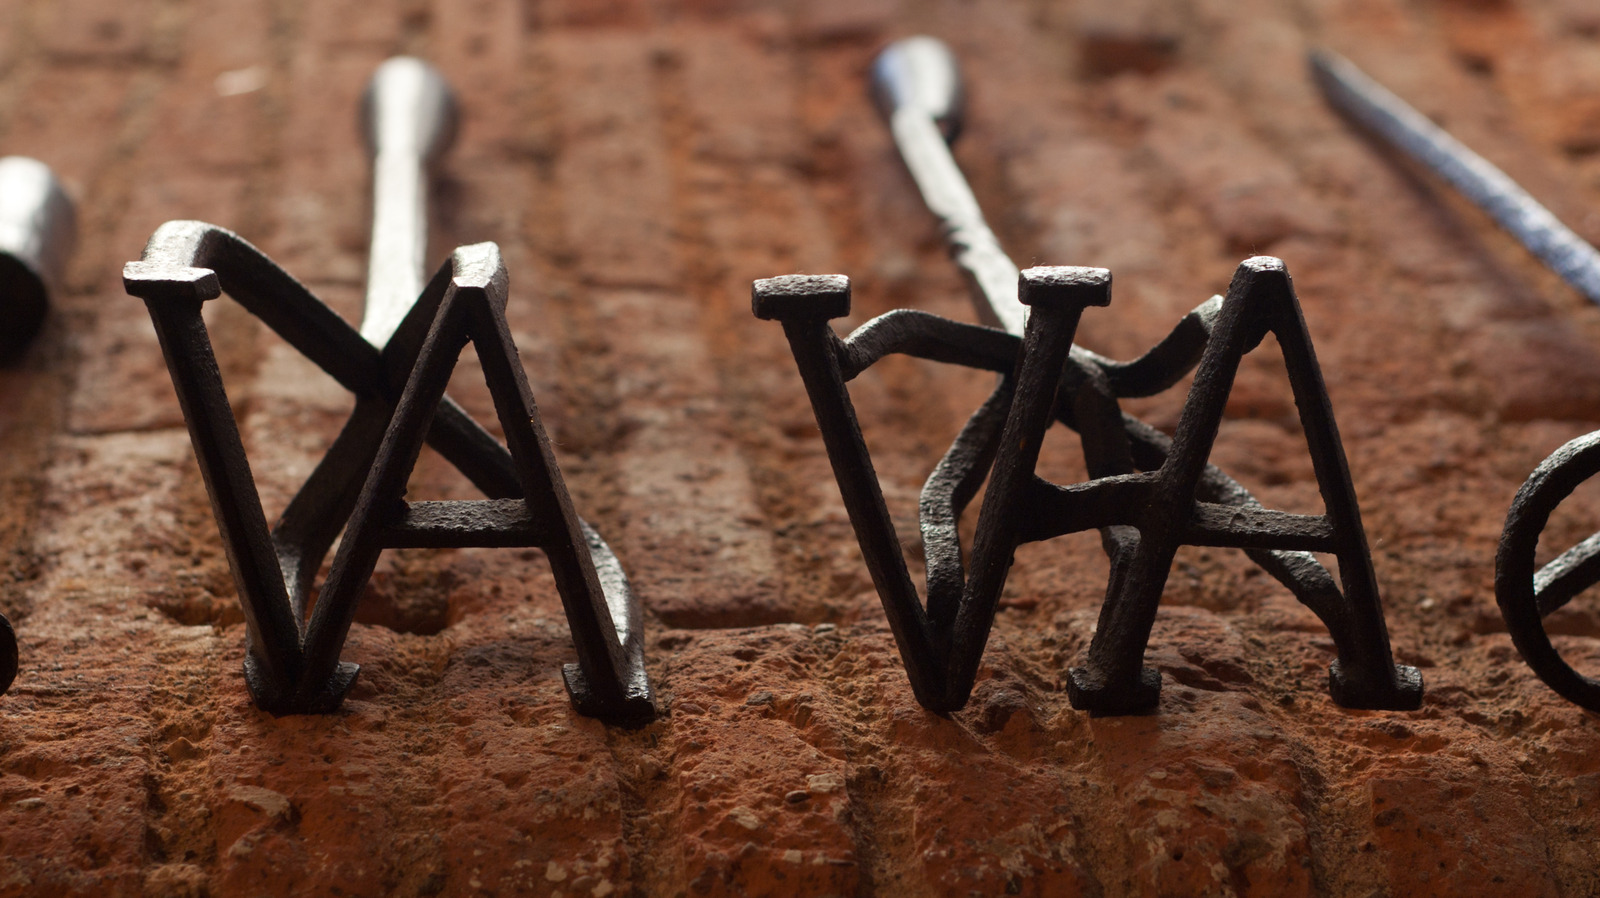 Tips for Proper Maintenance and Care of Branding Irons